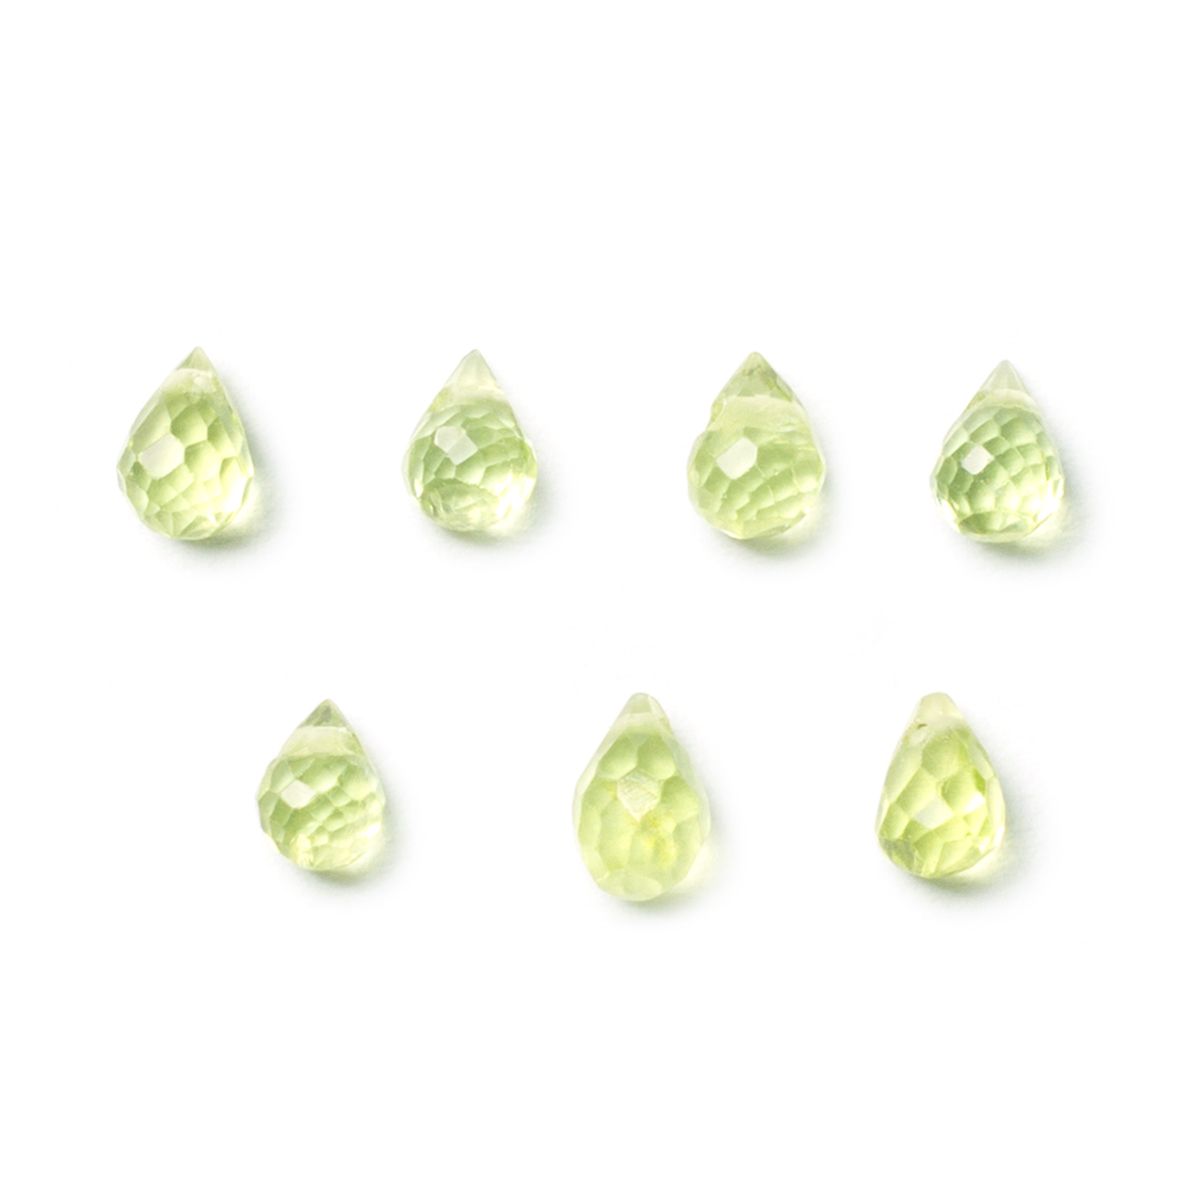 Peridot Faceted Drop Briolette Beads, Approx 5x3.5mm to 6x4mm, Pack of 10 beads